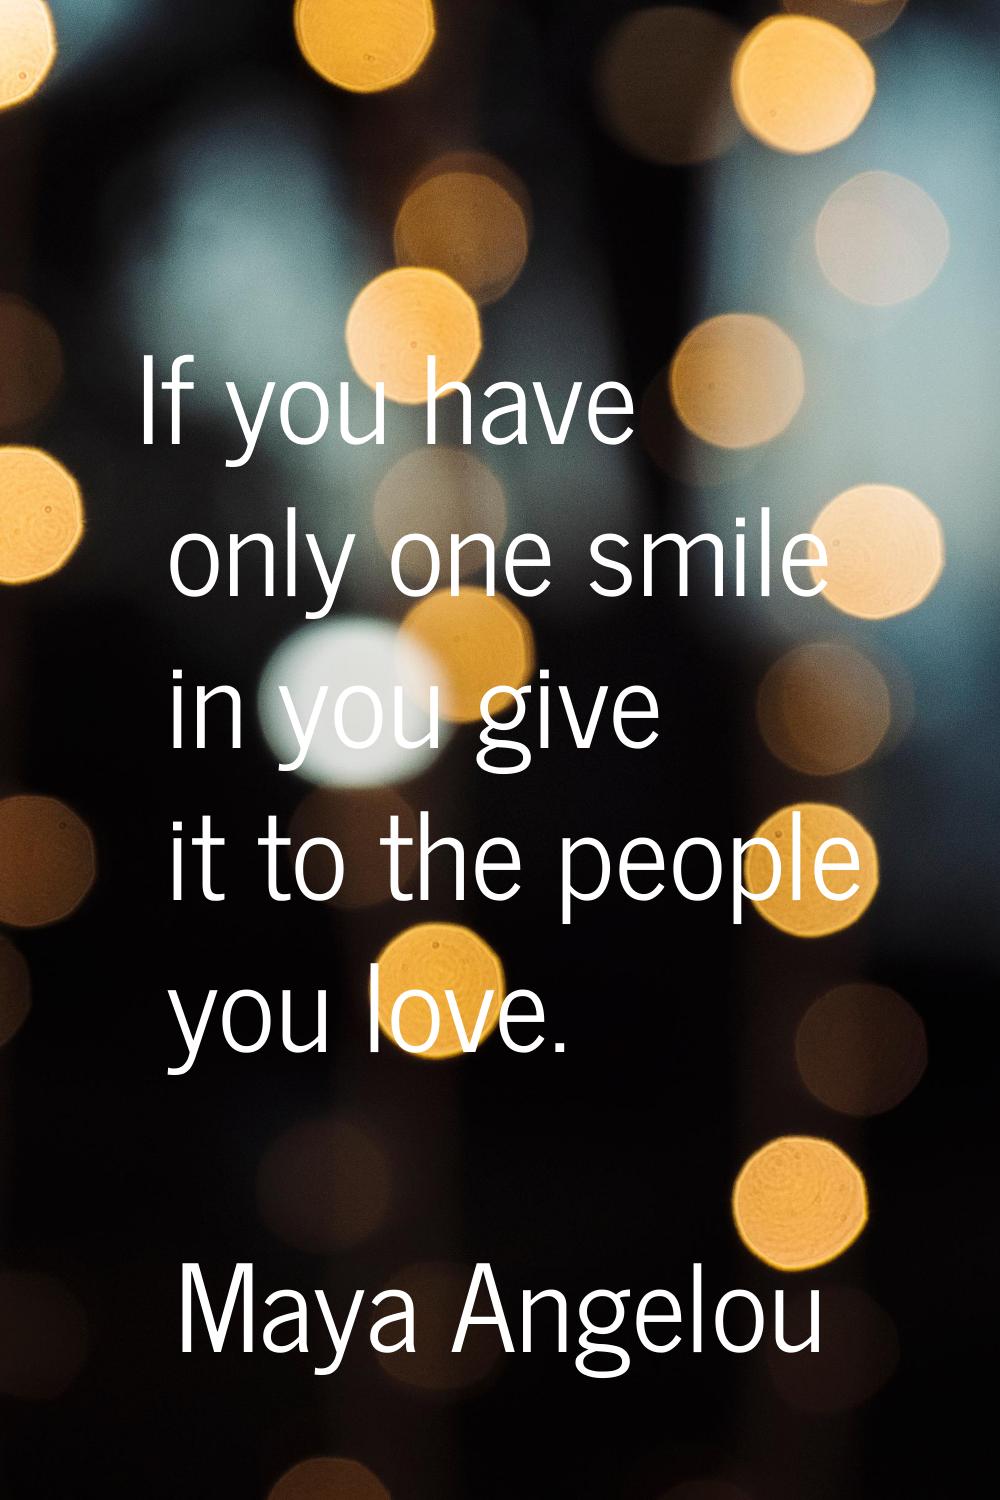 If you have only one smile in you give it to the people you love.